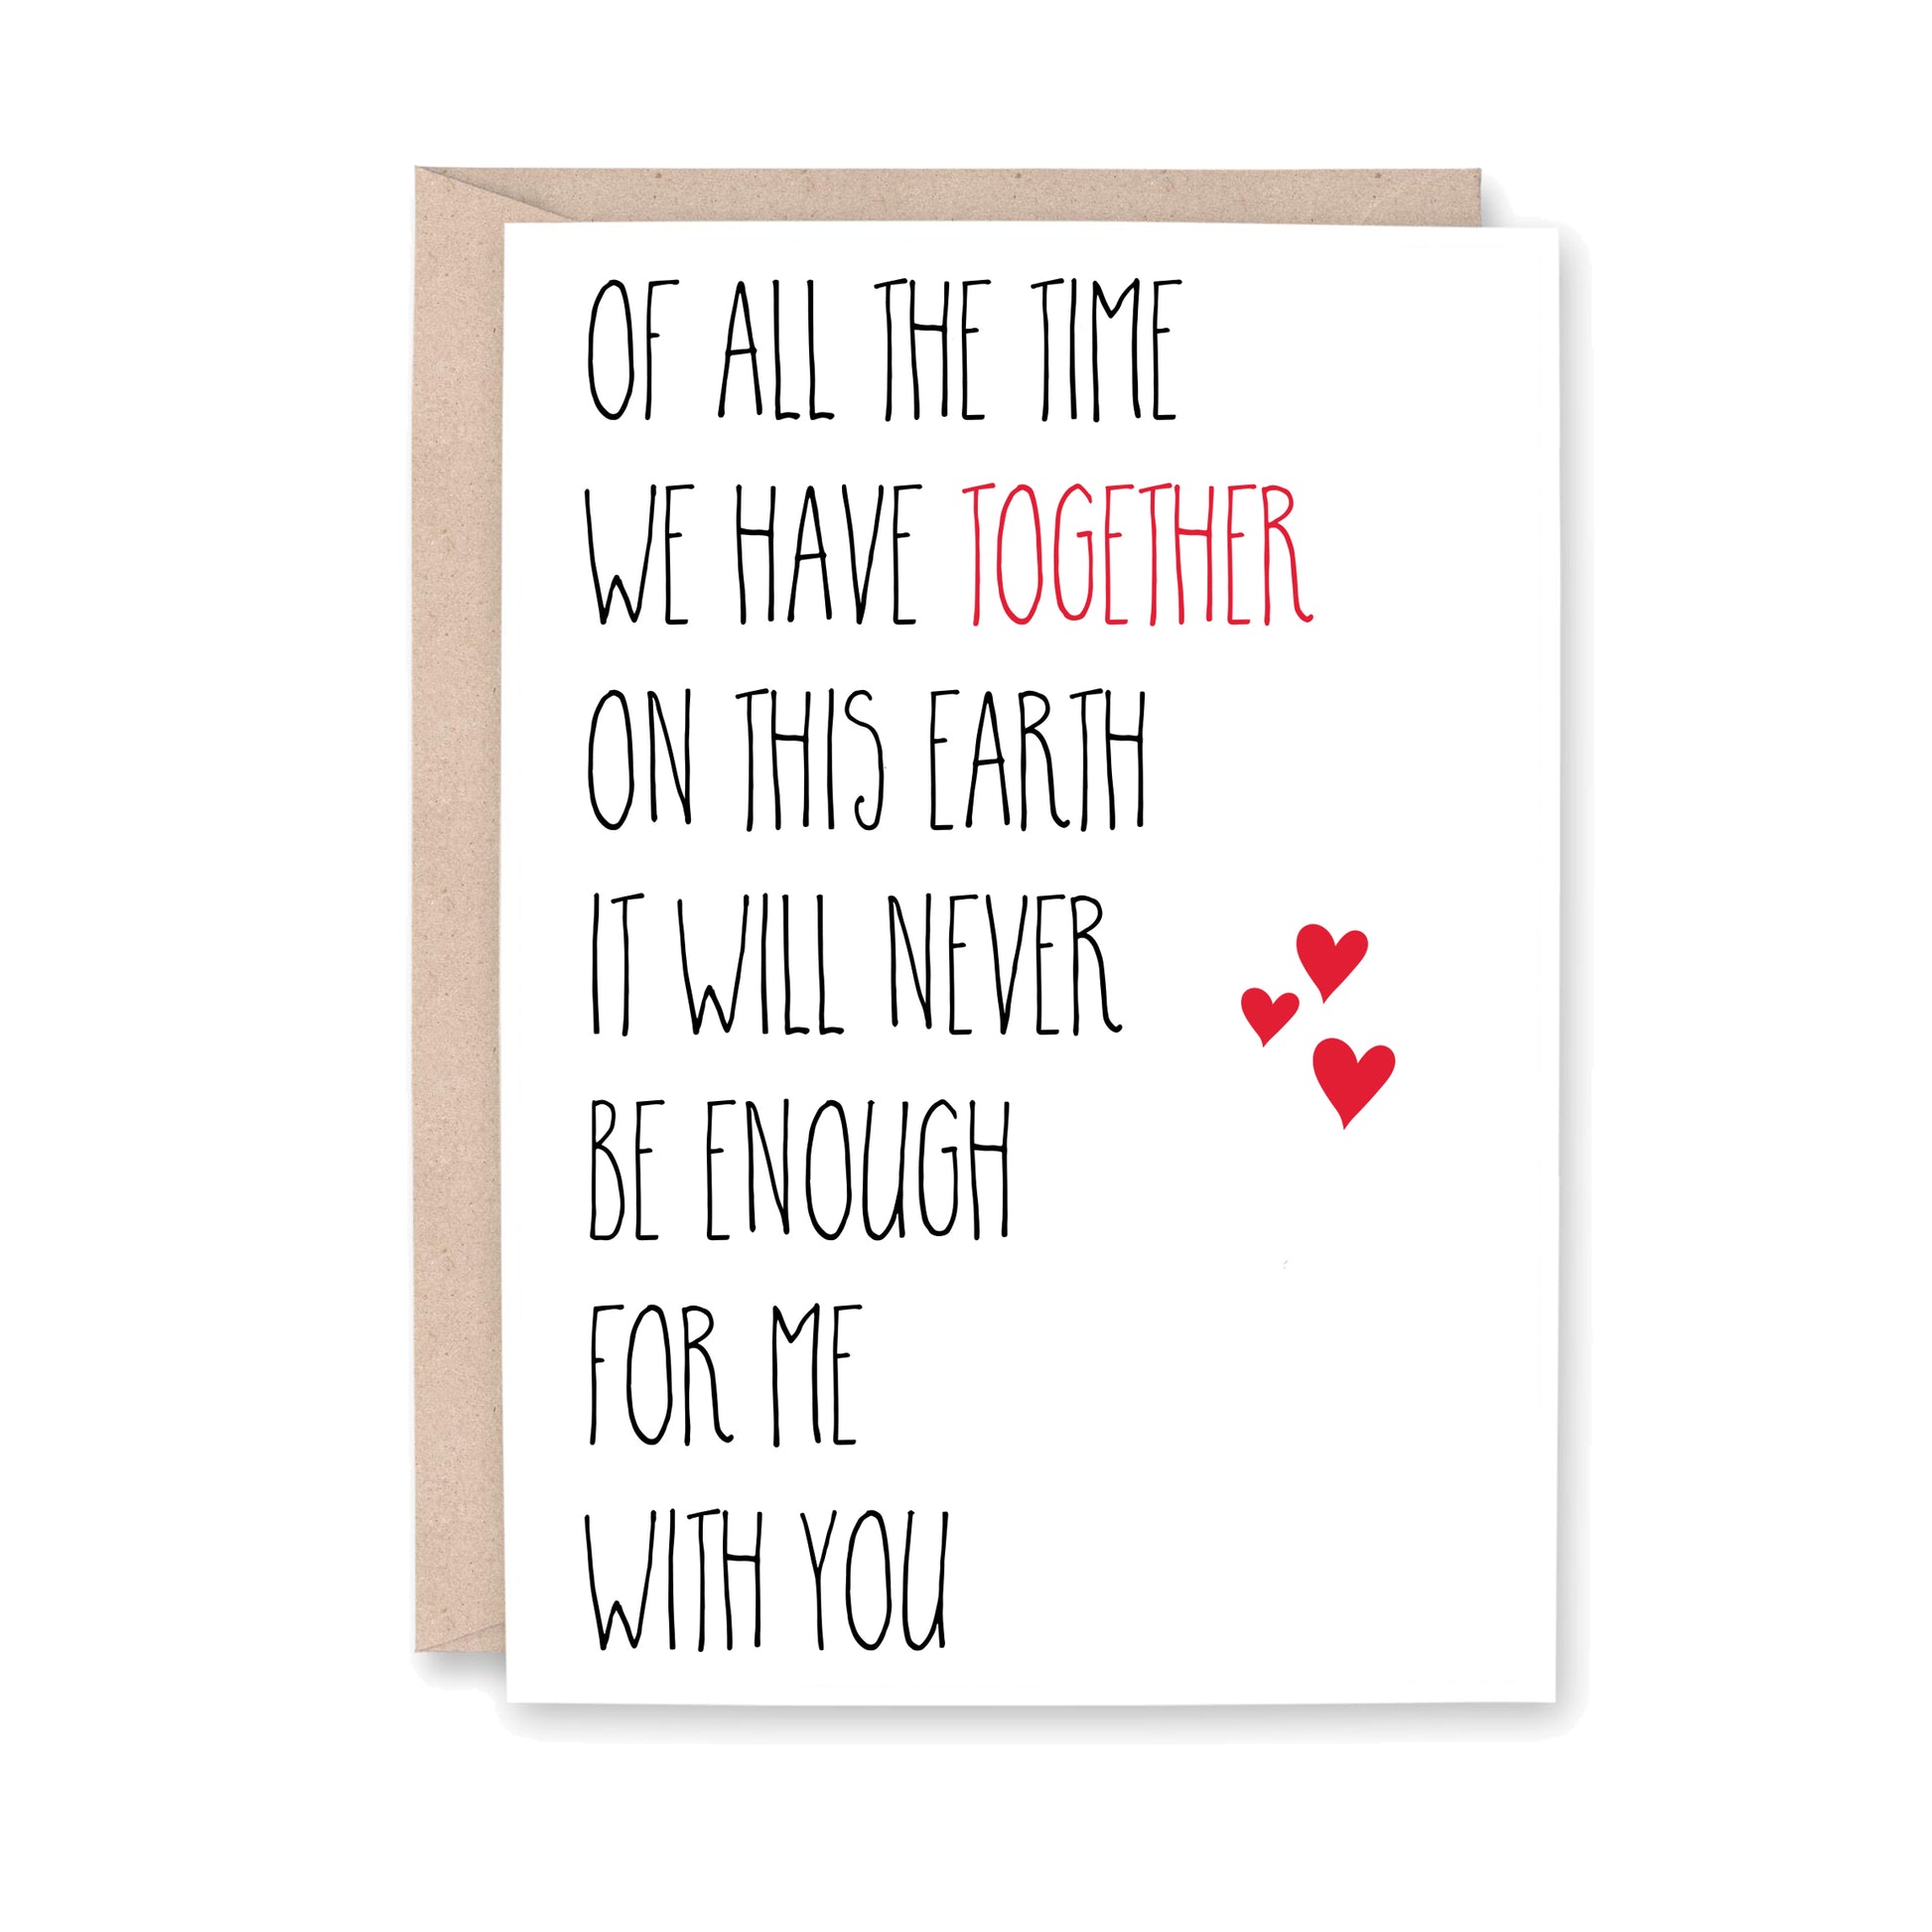 Greeting card that reads: Of all the time we have together on this Earth, It will never be enough for me with You